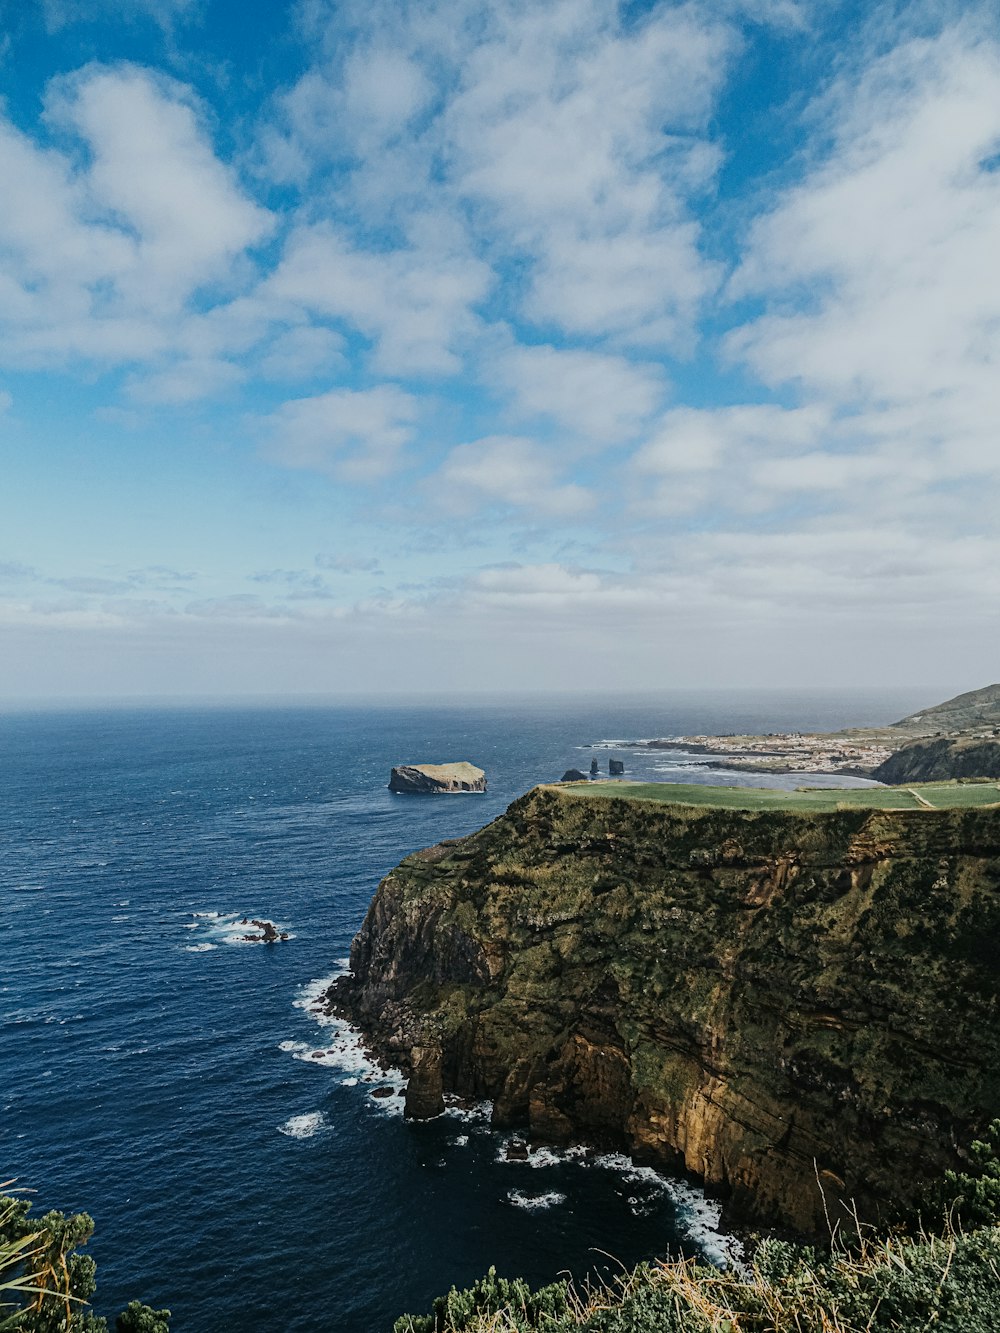 a scenic view of the ocean and cliffs